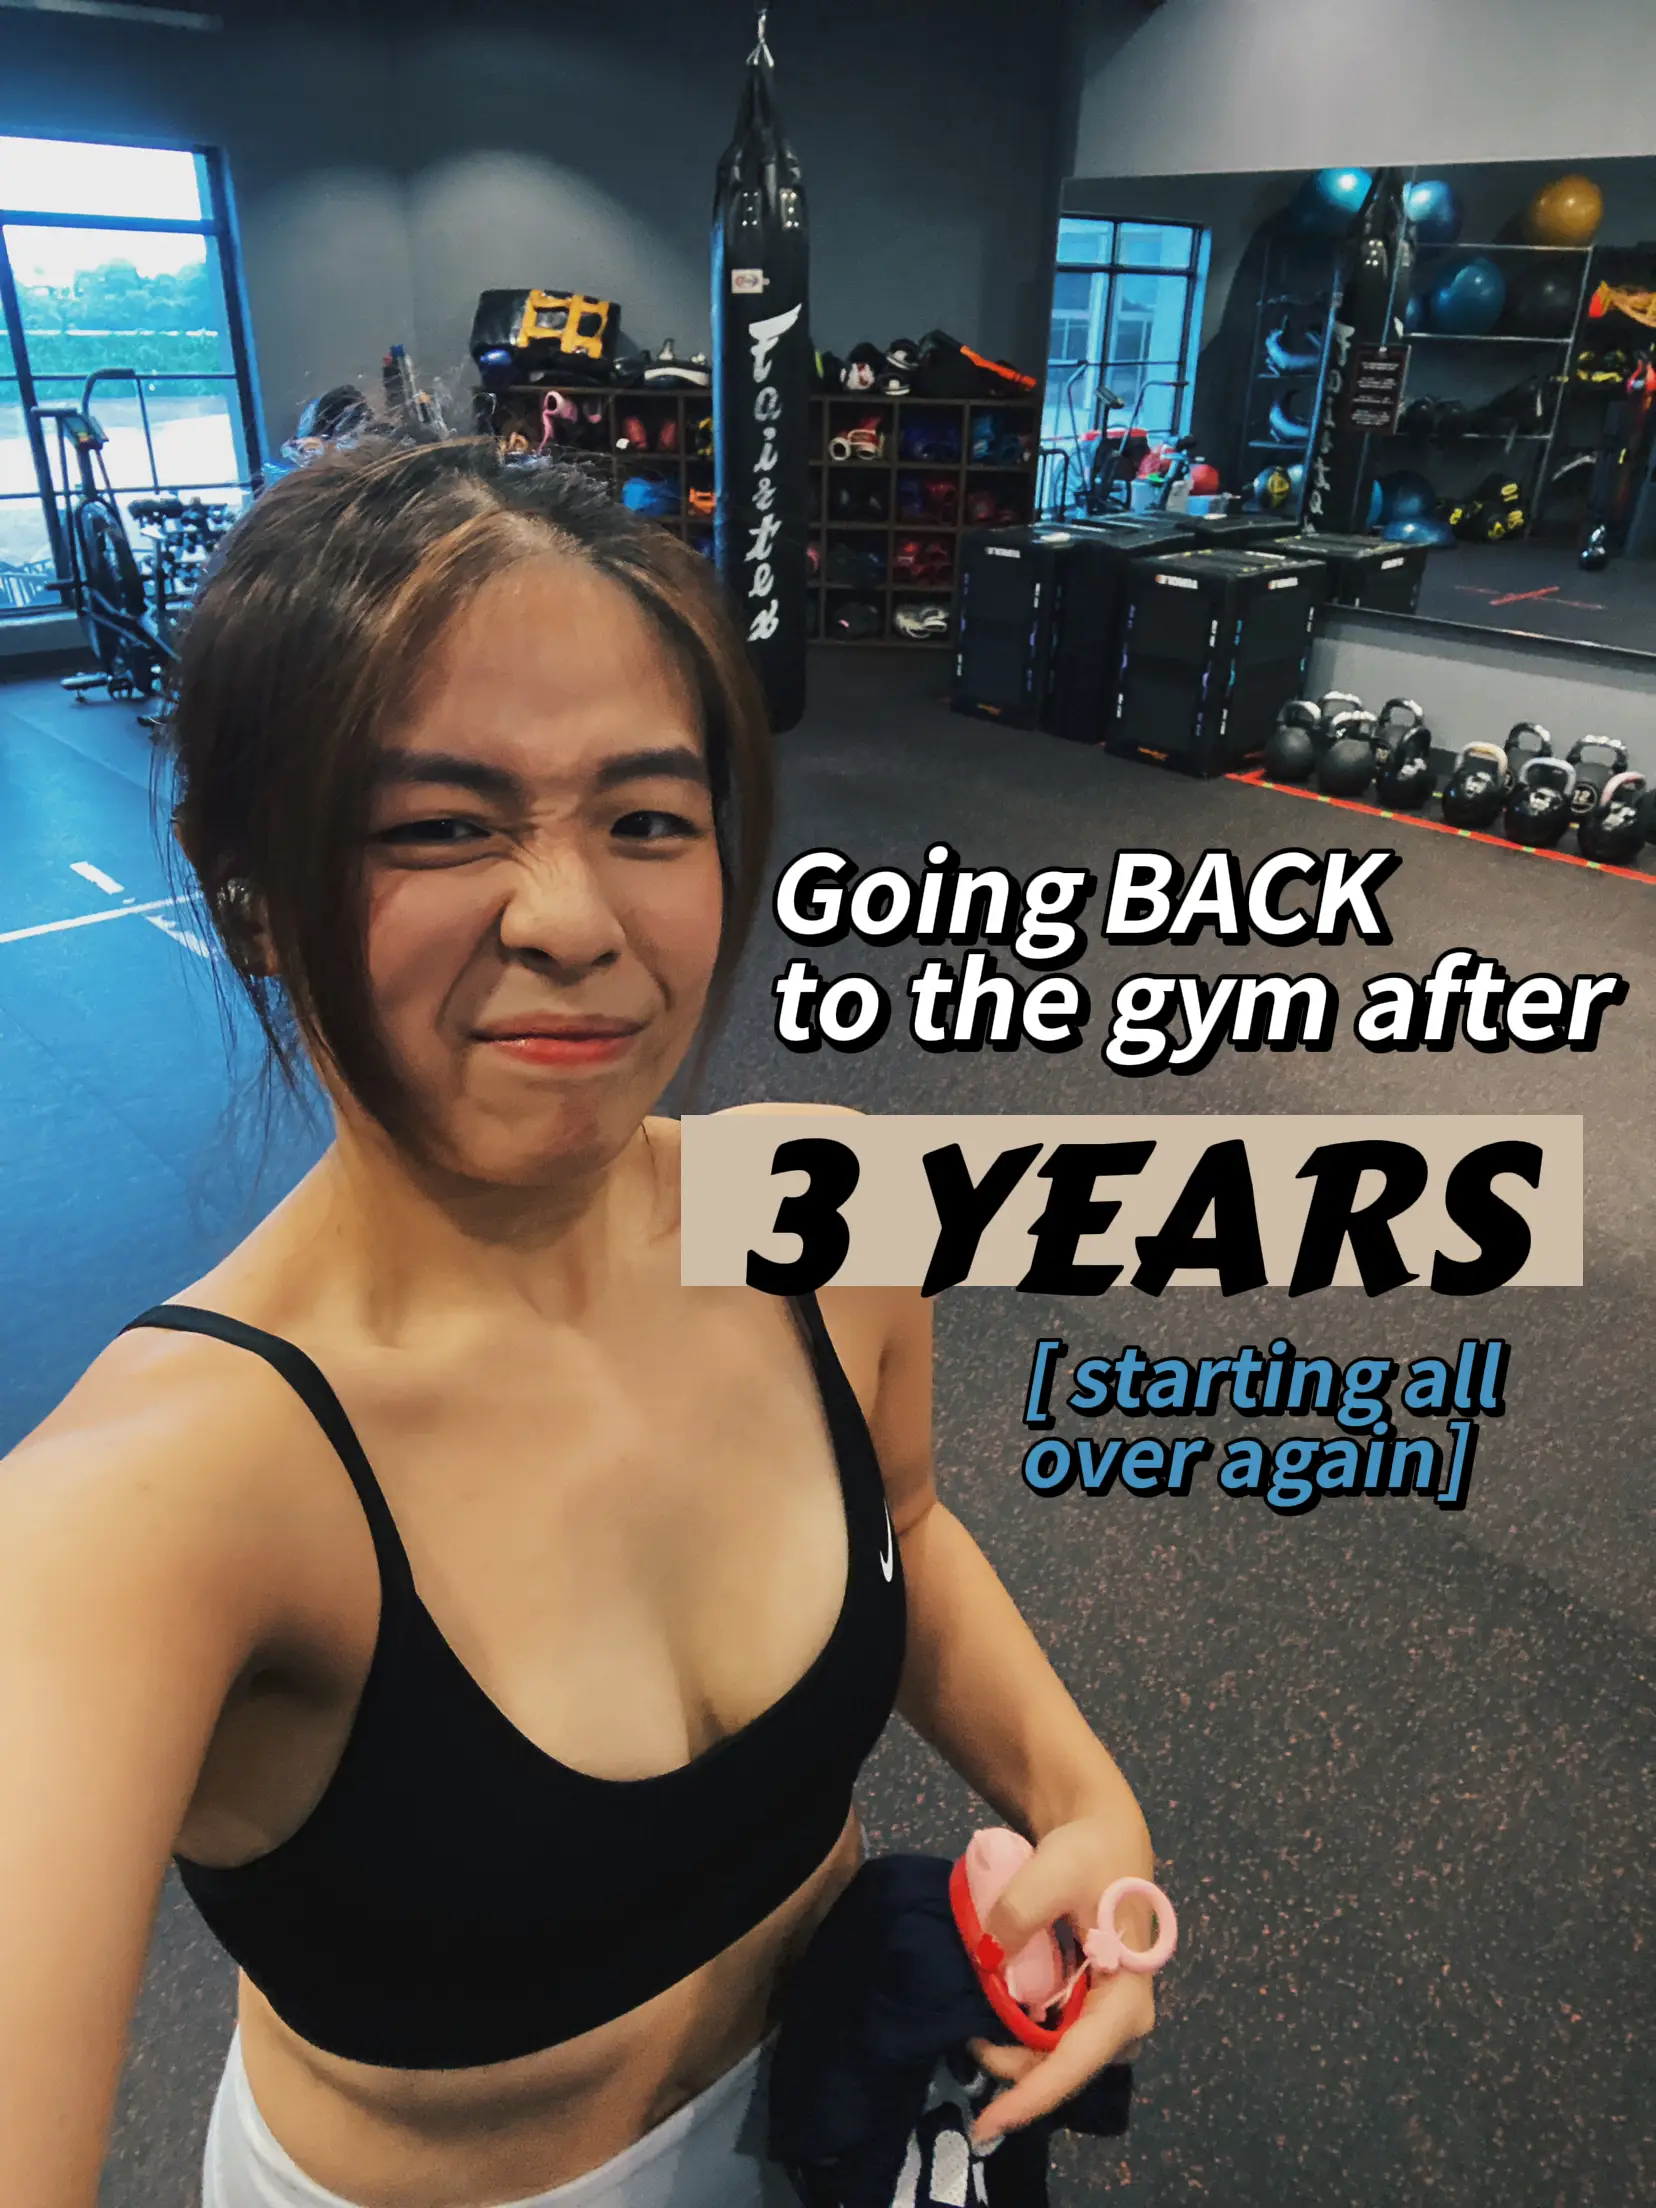 Left the gym for 3 YEARS! Doing things DIFFERENTLY's images